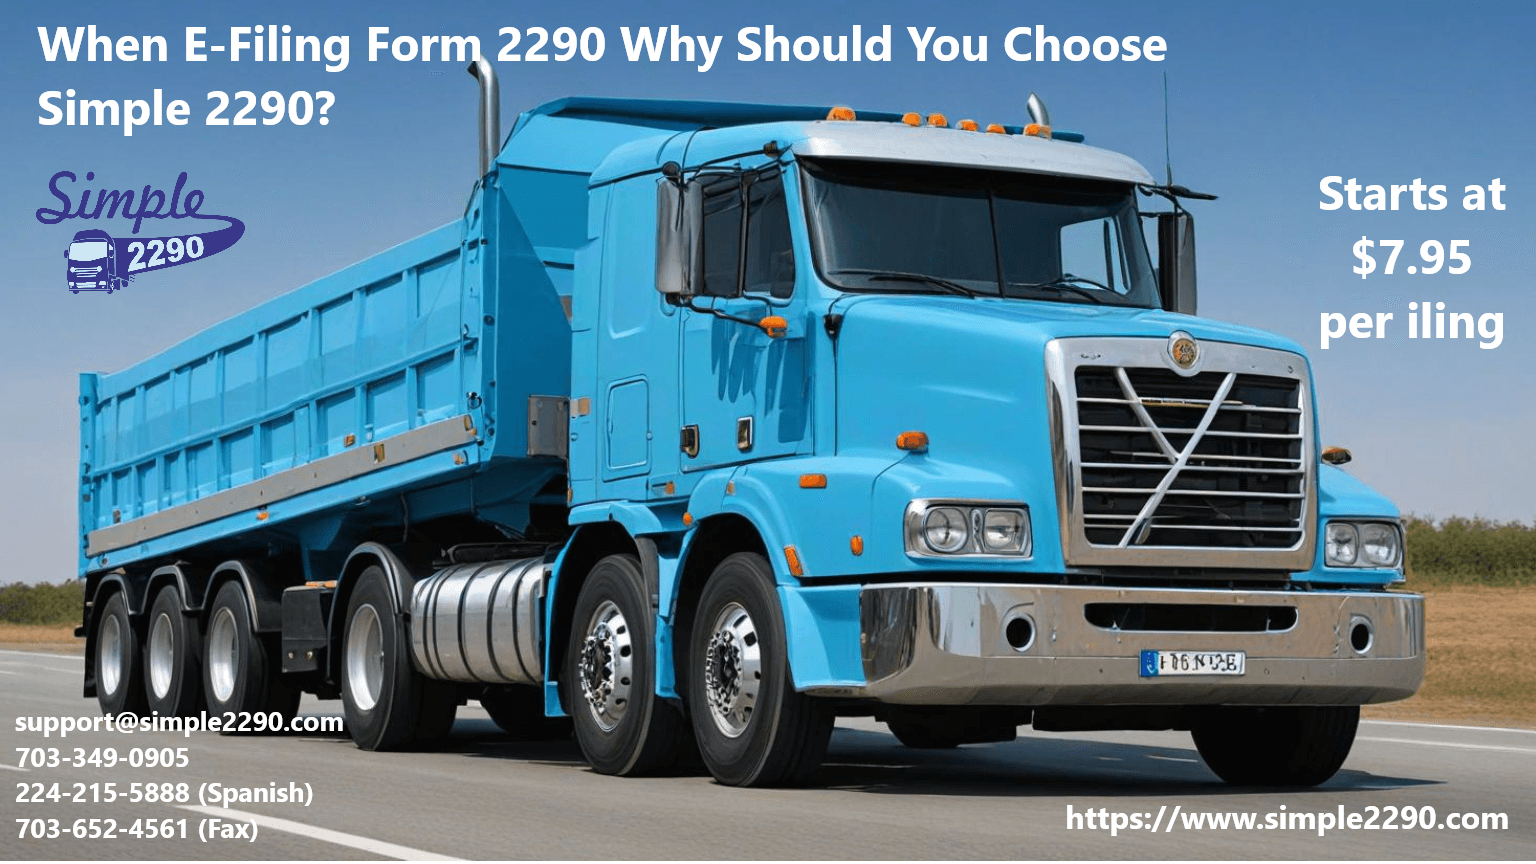 When E-Filing Form 2290 Why Should You Choose Simple 2290